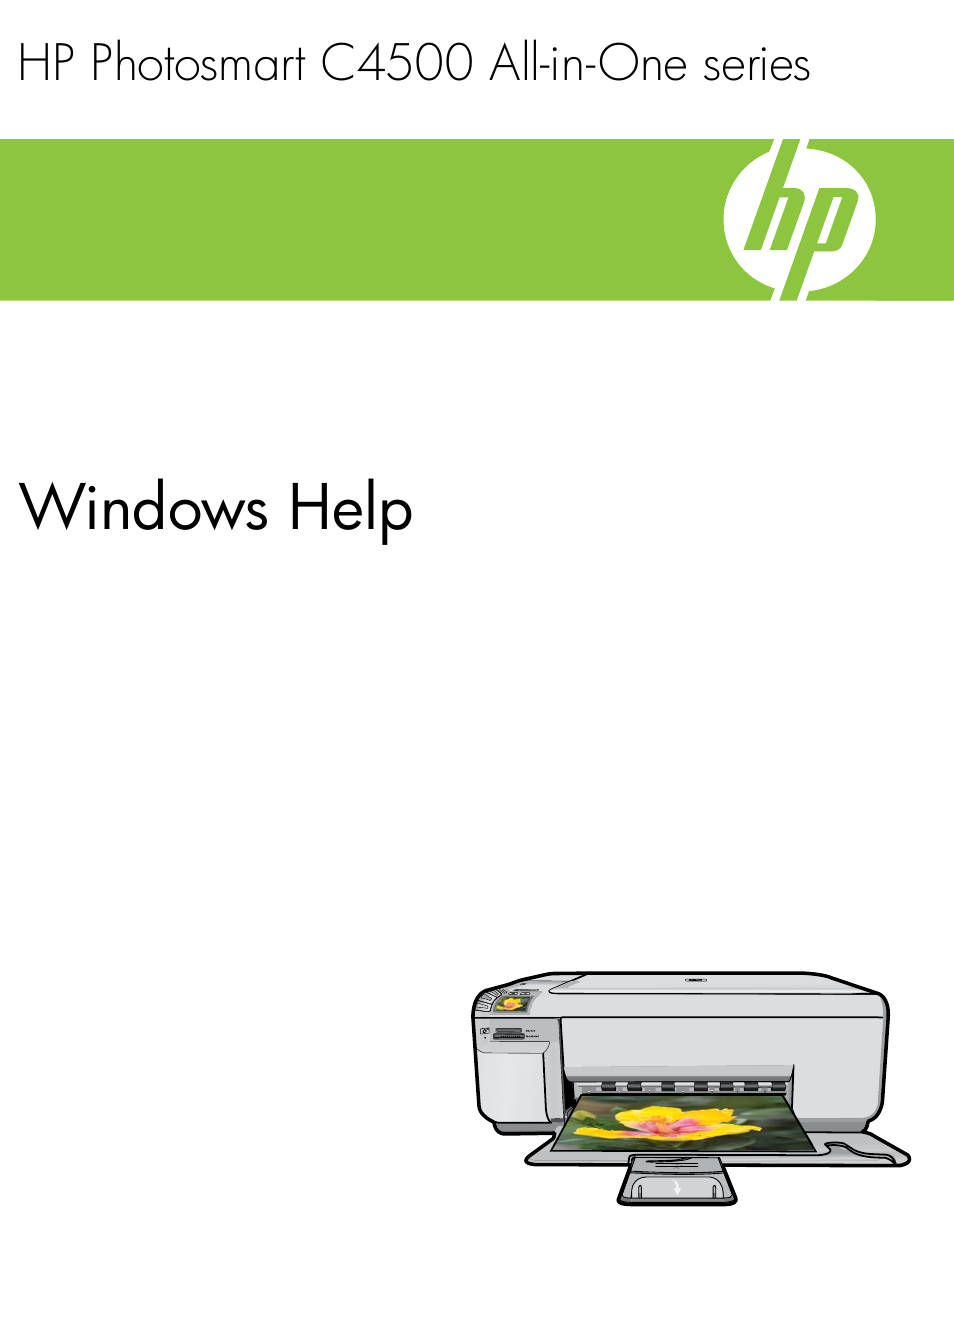 HP Photosmart C4580 All-in-One Printer User Manual | 261 pages